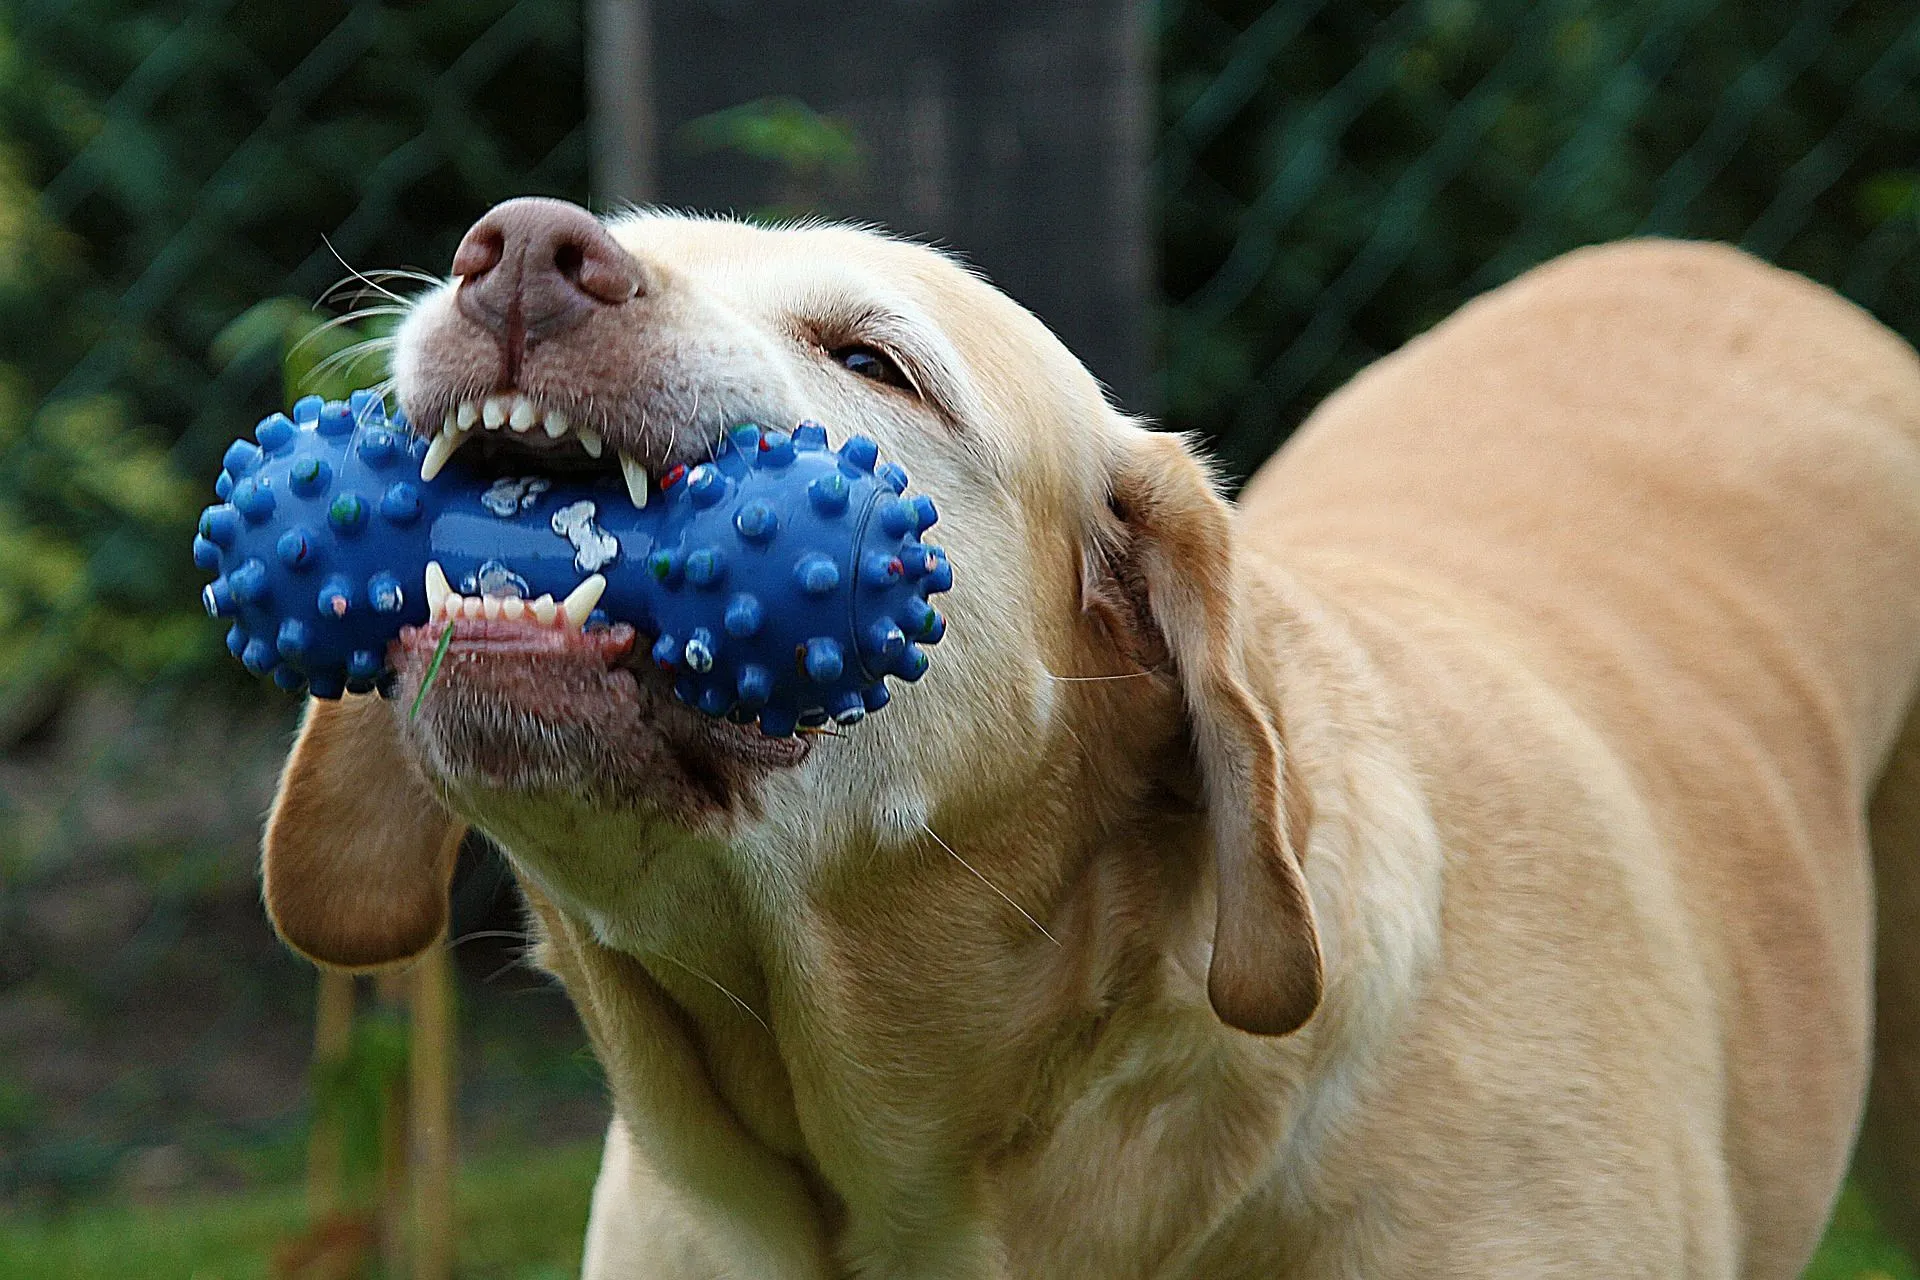 Read some interesting facts that answer the question of why do dogs like squeaky toys here.